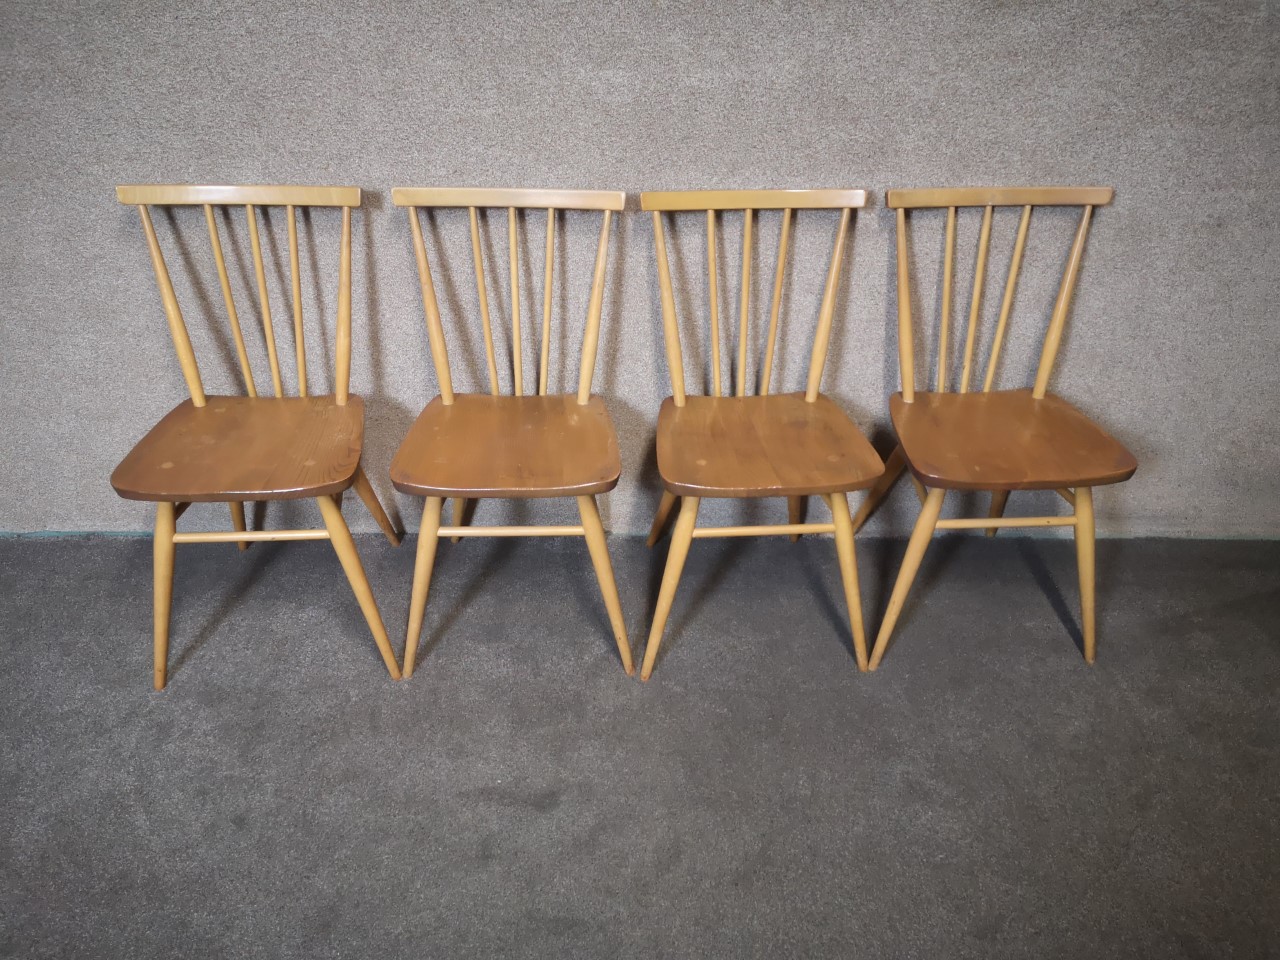 Ercol furniture (Set of 4 chairs)画像